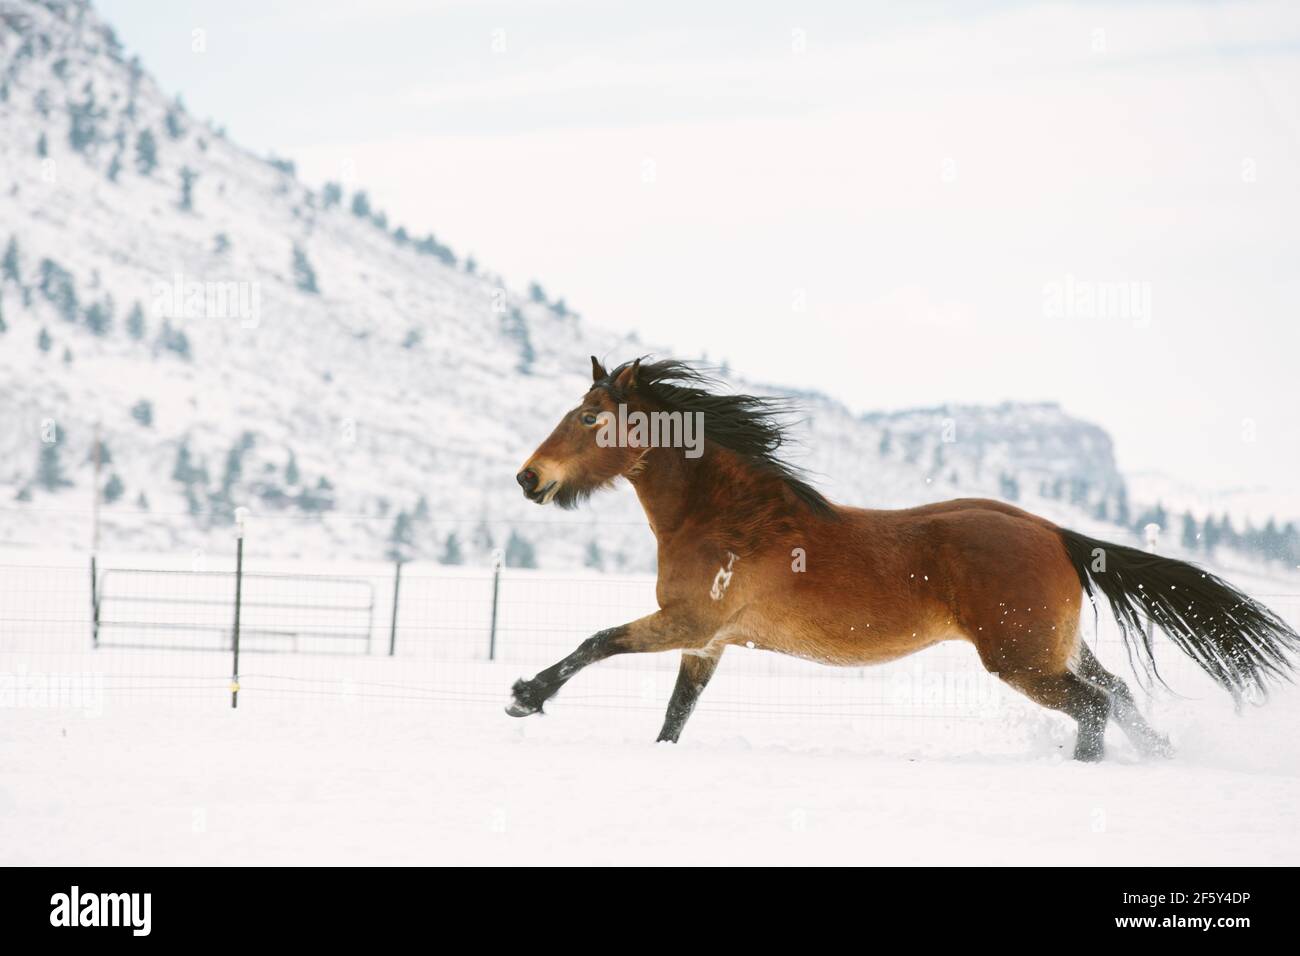 Draft horse galloping in the snow with mountain in background Stock Photo